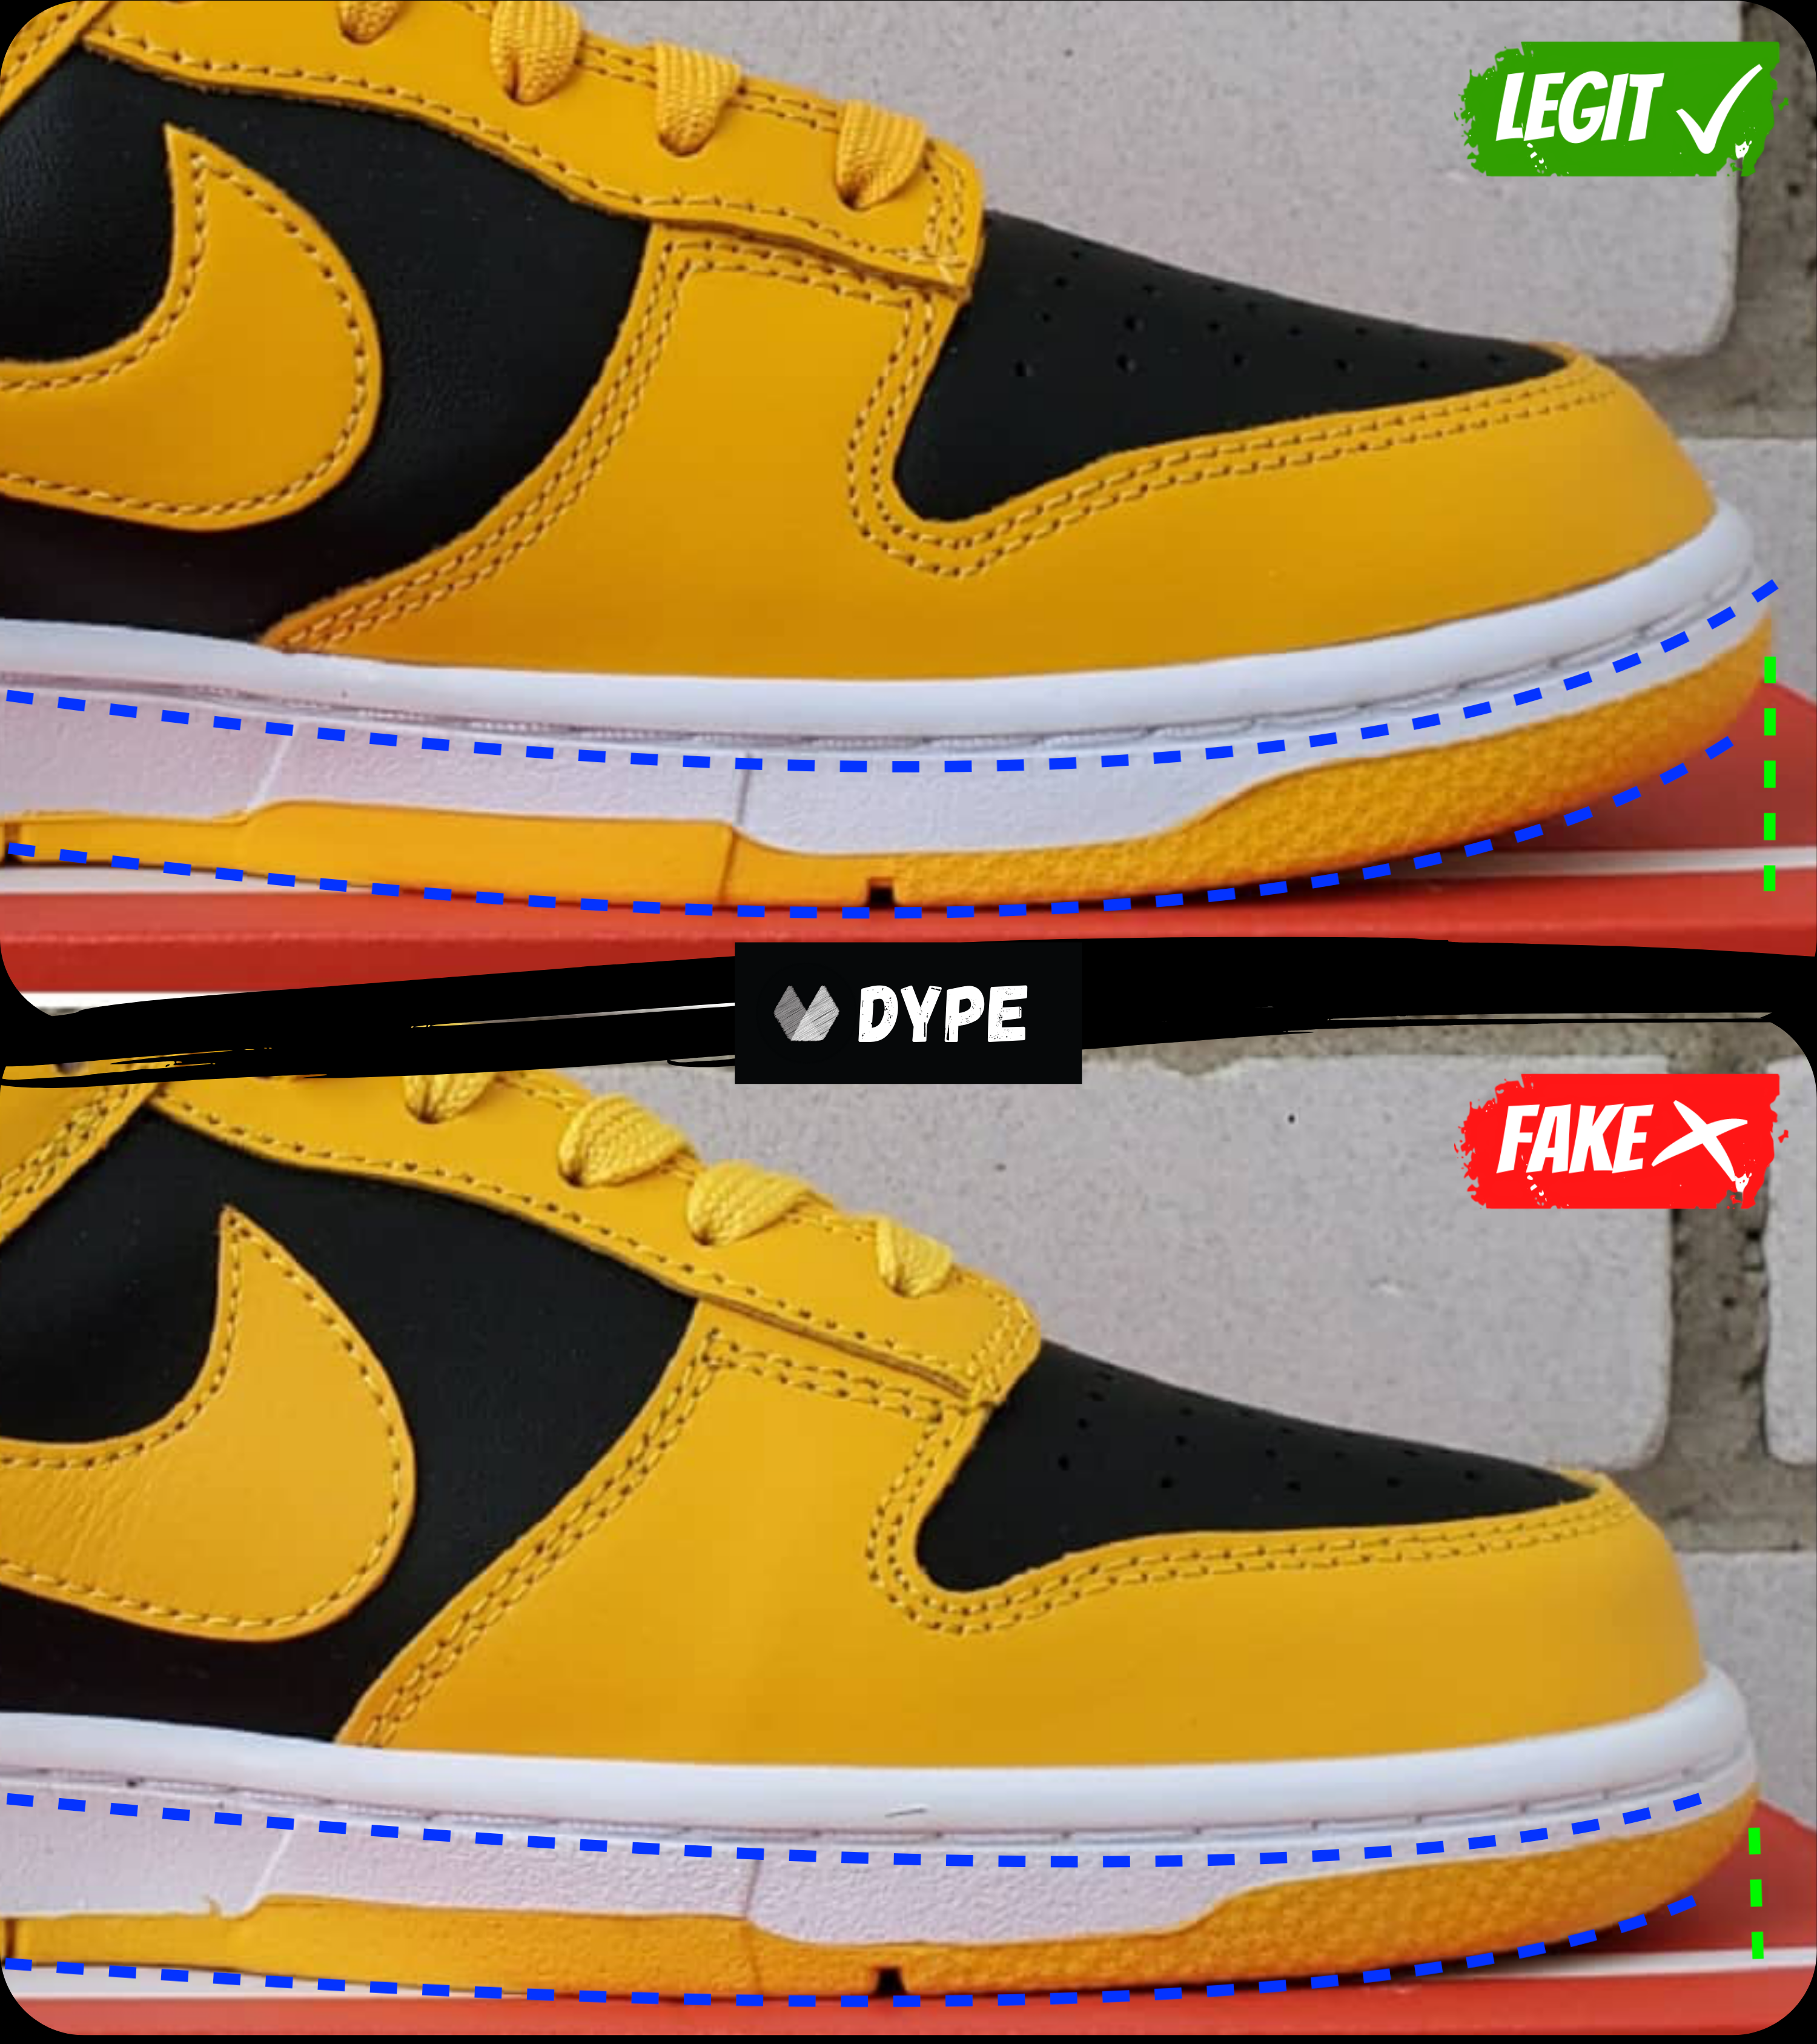 How to Tell Fake Nike Shoes: 10 Ways to Authenticity Check Real Nikes